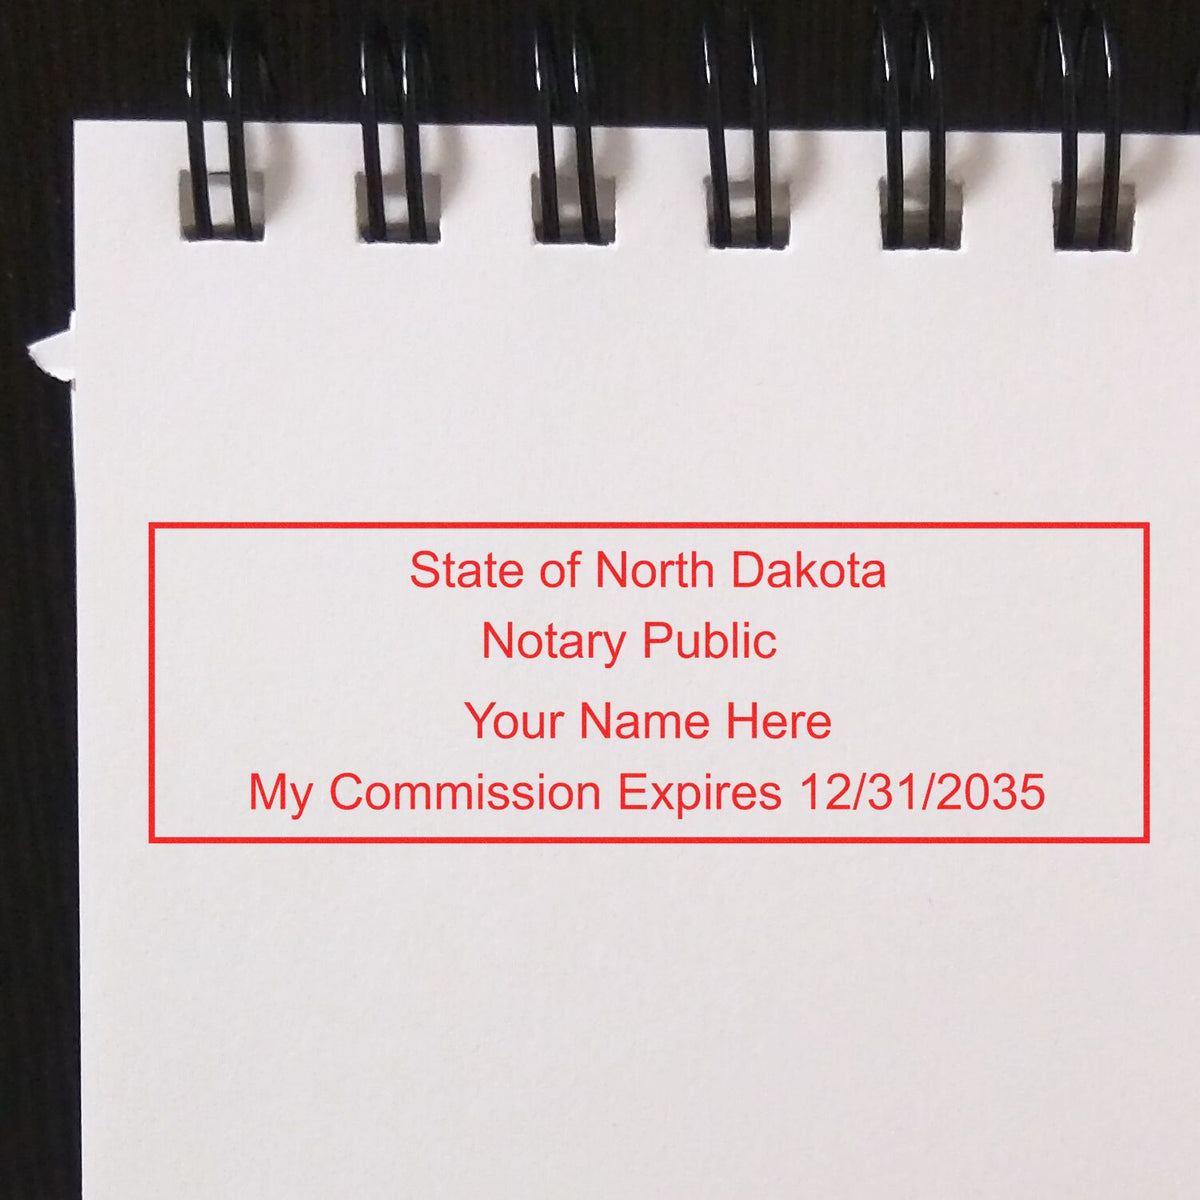 A stamped impression of the Wooden Handle North Dakota Rectangular Notary Public Stamp in this stylish lifestyle photo, setting the tone for a unique and personalized product.